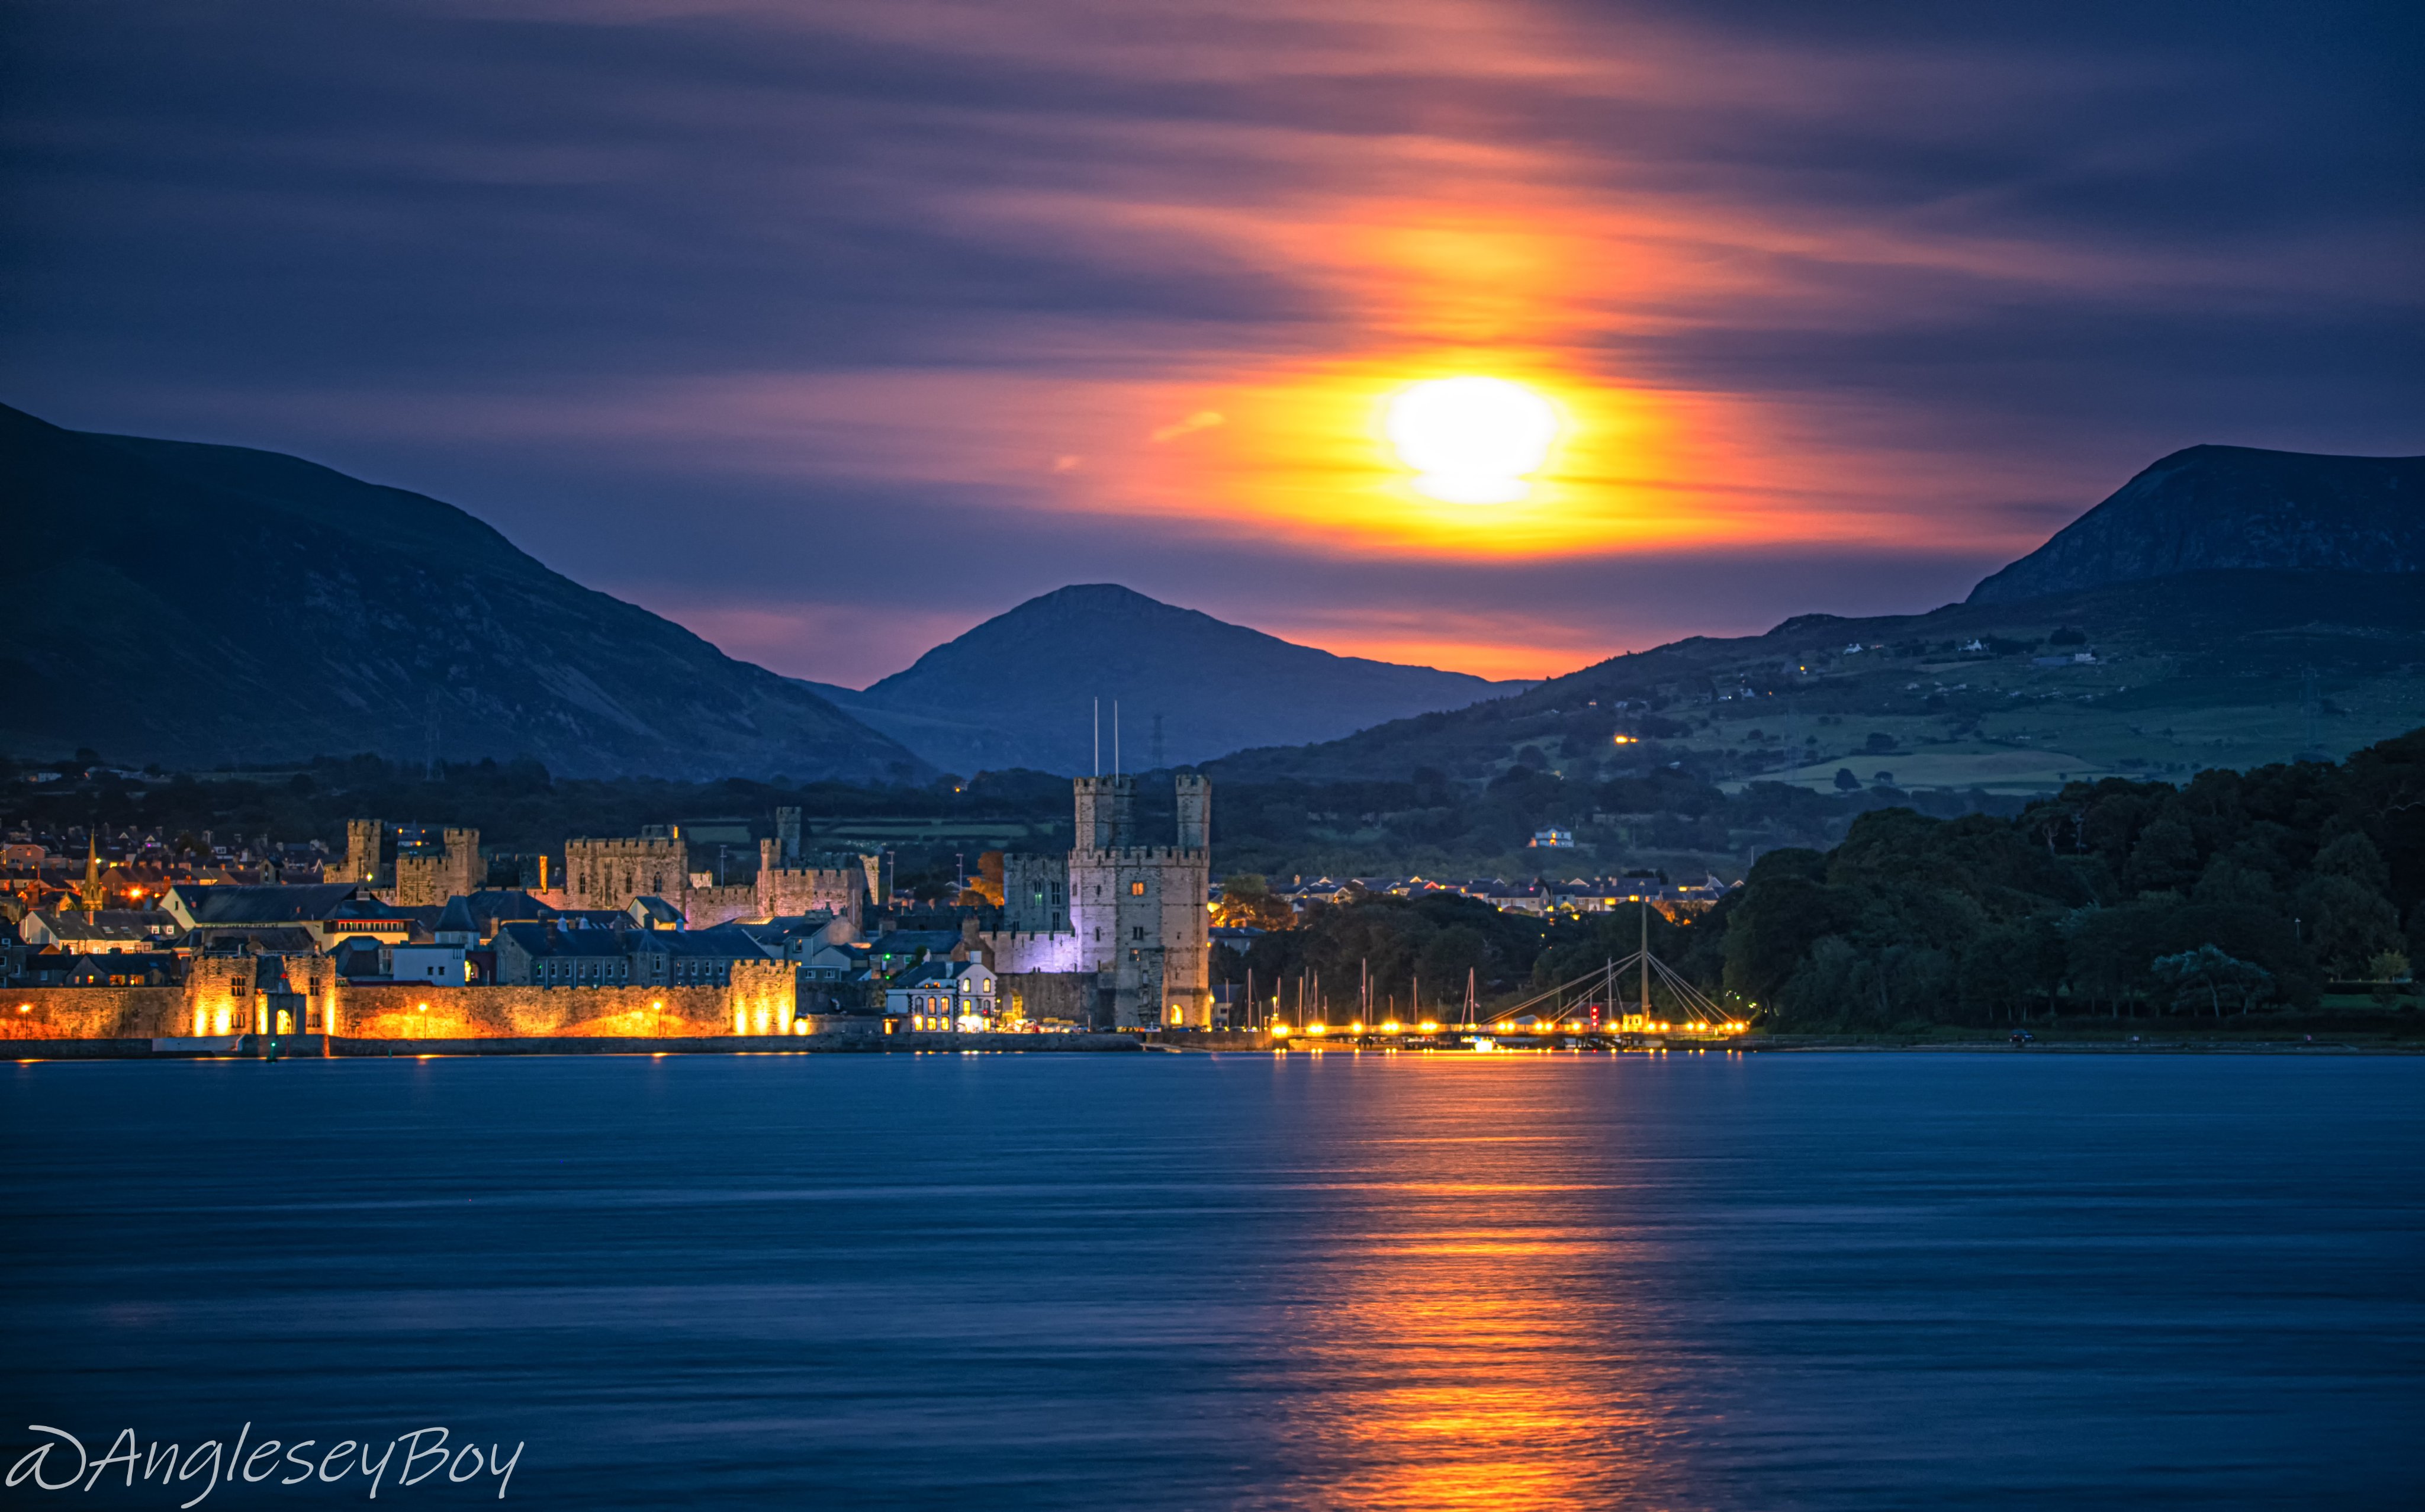 1st Place Sturgeon moon rising over Caernarfon Castle by Phil Taylor @angleseyboy